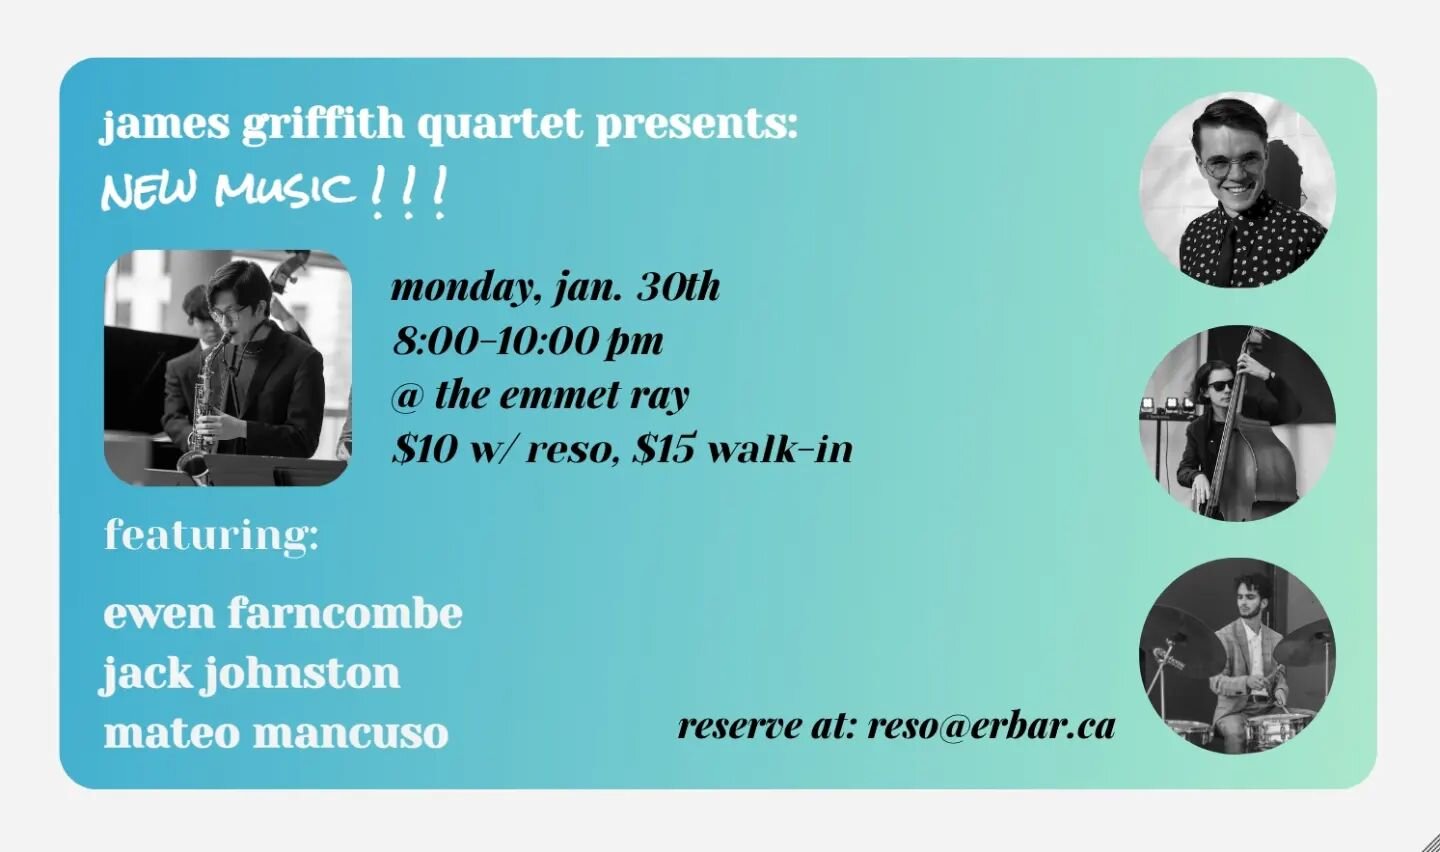 Hi friends! Excited to be playing again with some wonderful folks after a bit of a school-induced hiatus. On Monday Jan. 30th from 8-10 pm, we will be premiering some new original music (&amp; standards) @theemmetray ! We hope you can join us :)

fea